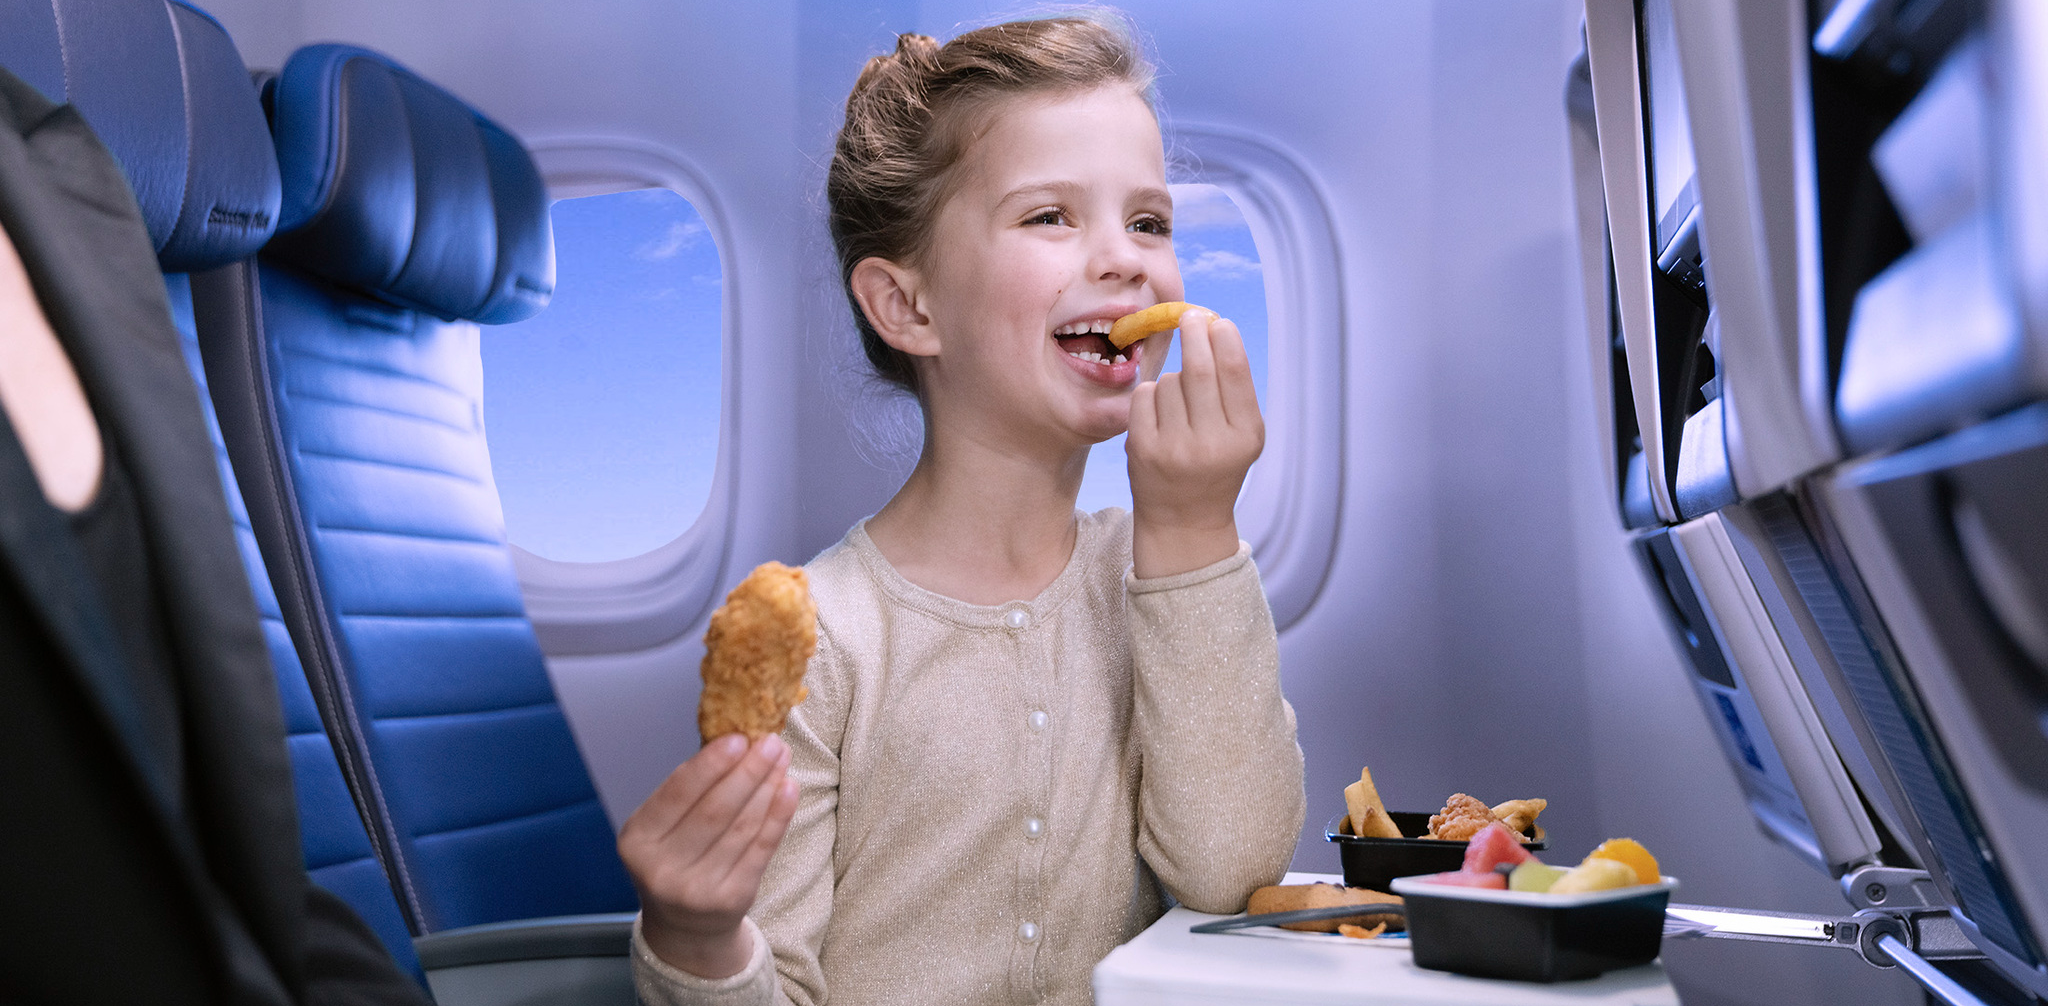 United Airlines Kids Meal